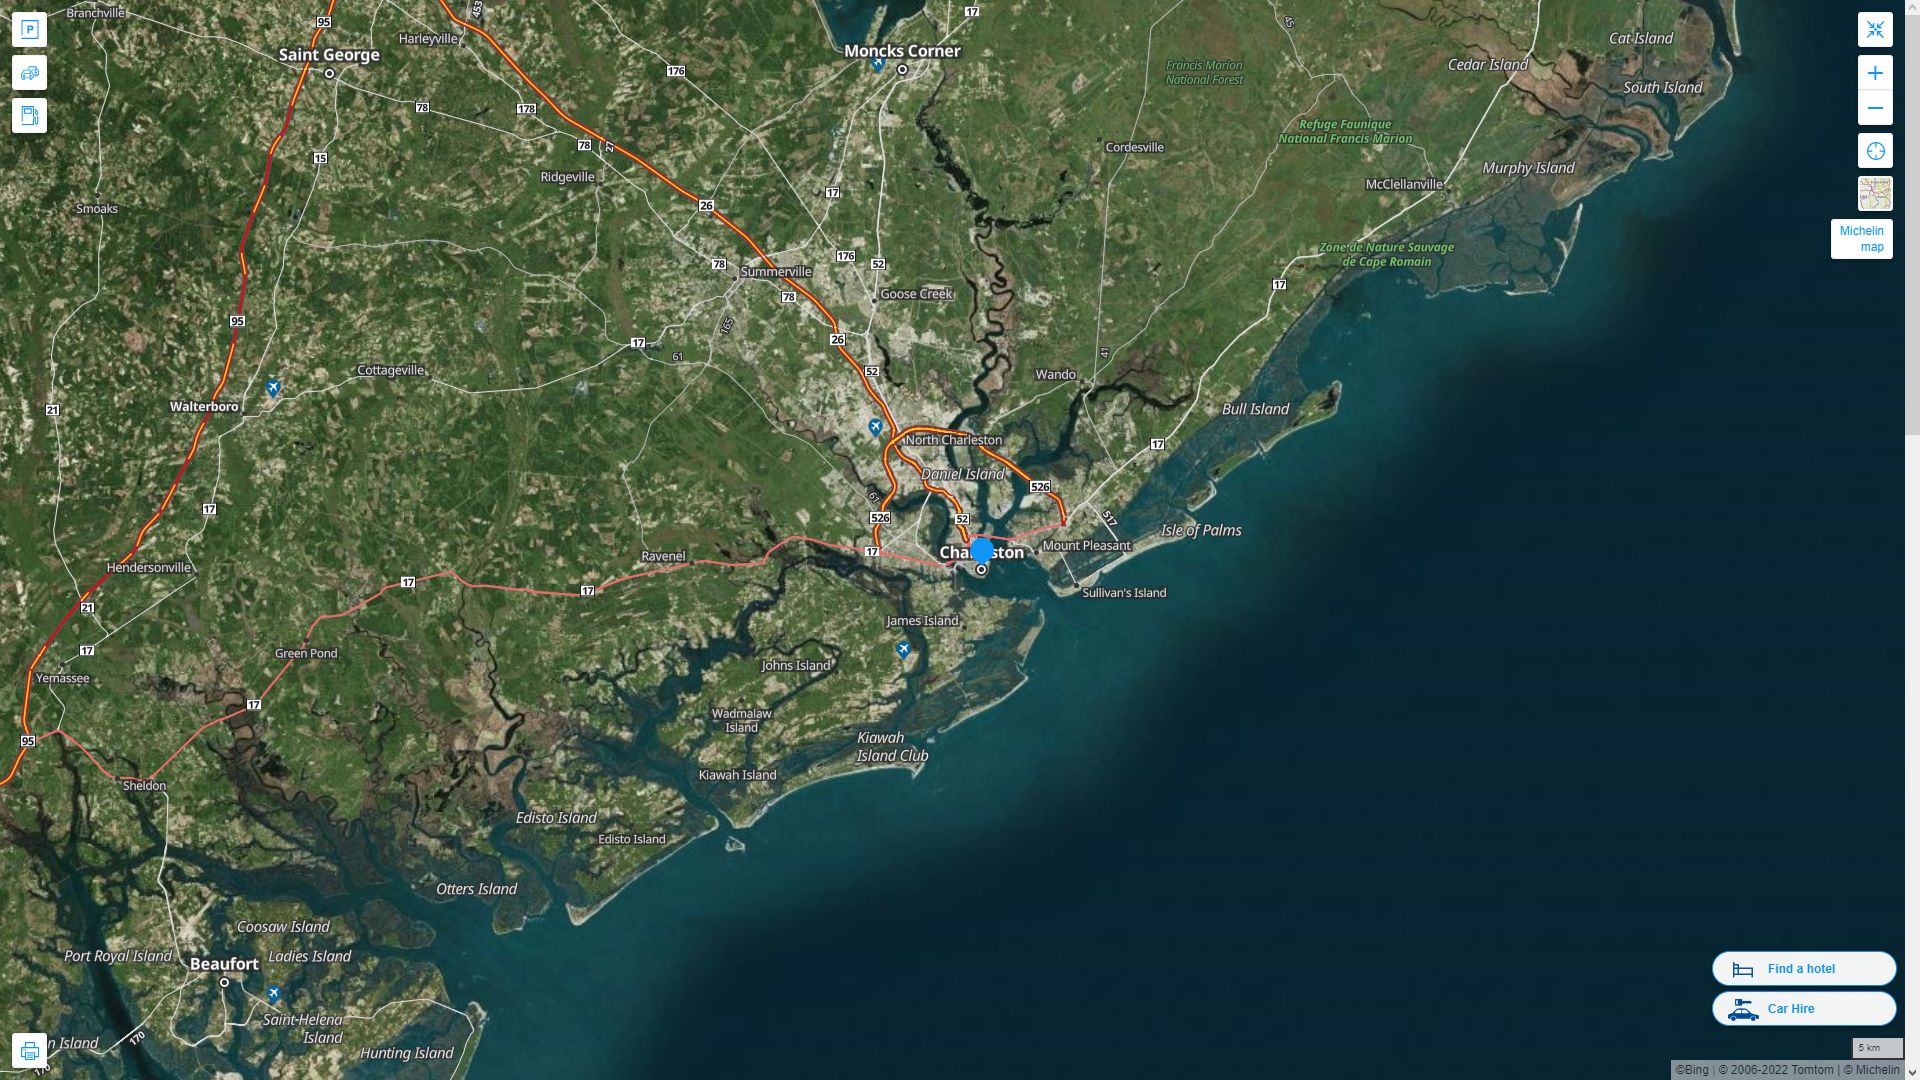 Charleston South Carolina Highway and Road Map with Satellite View